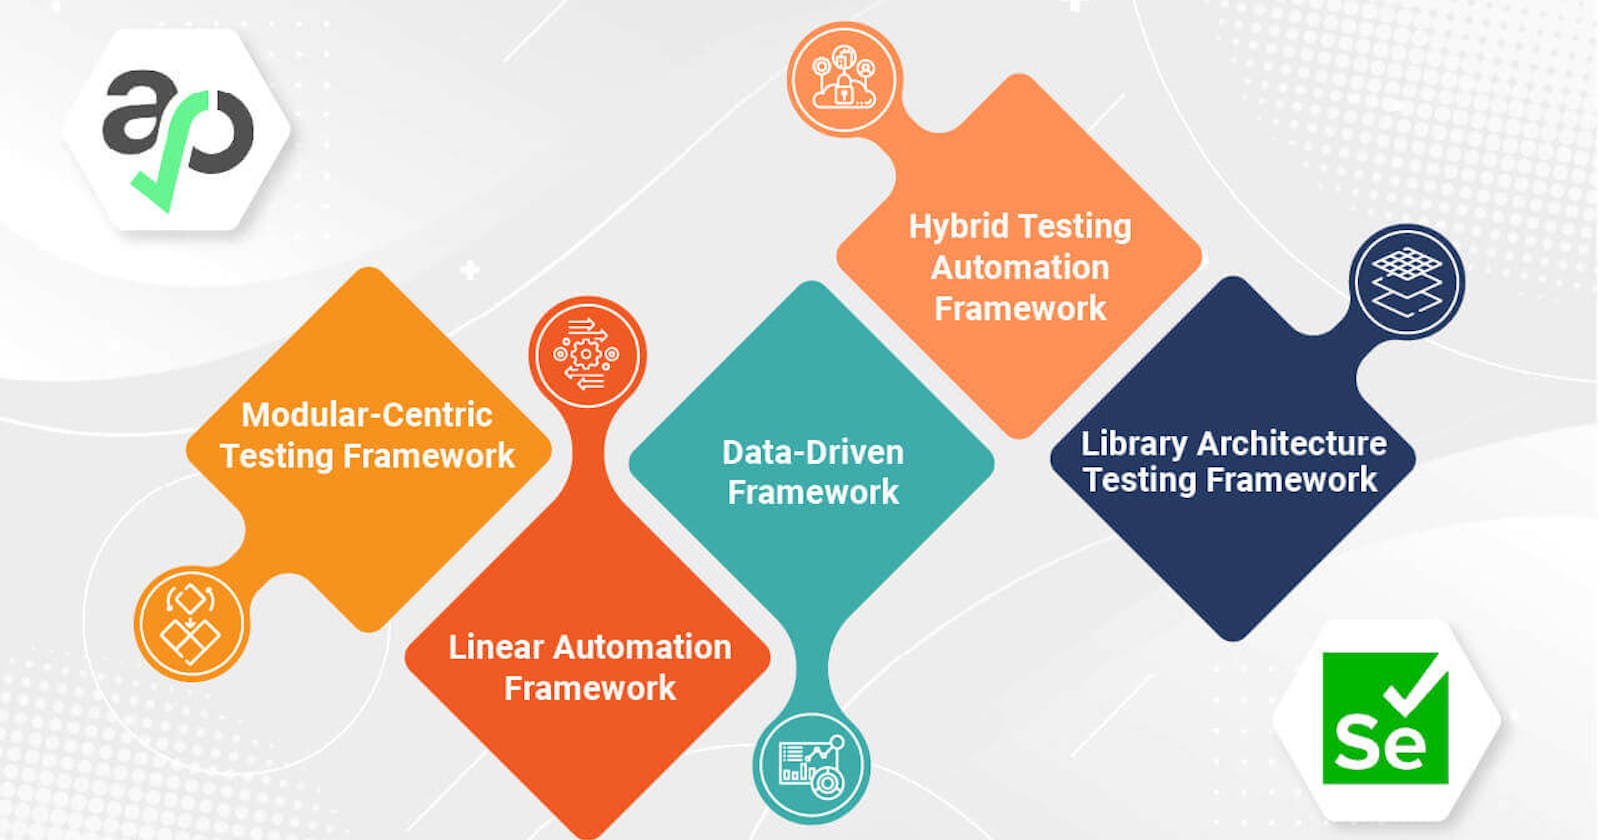 What Are The Different Types Of Test Automation Frameworks?